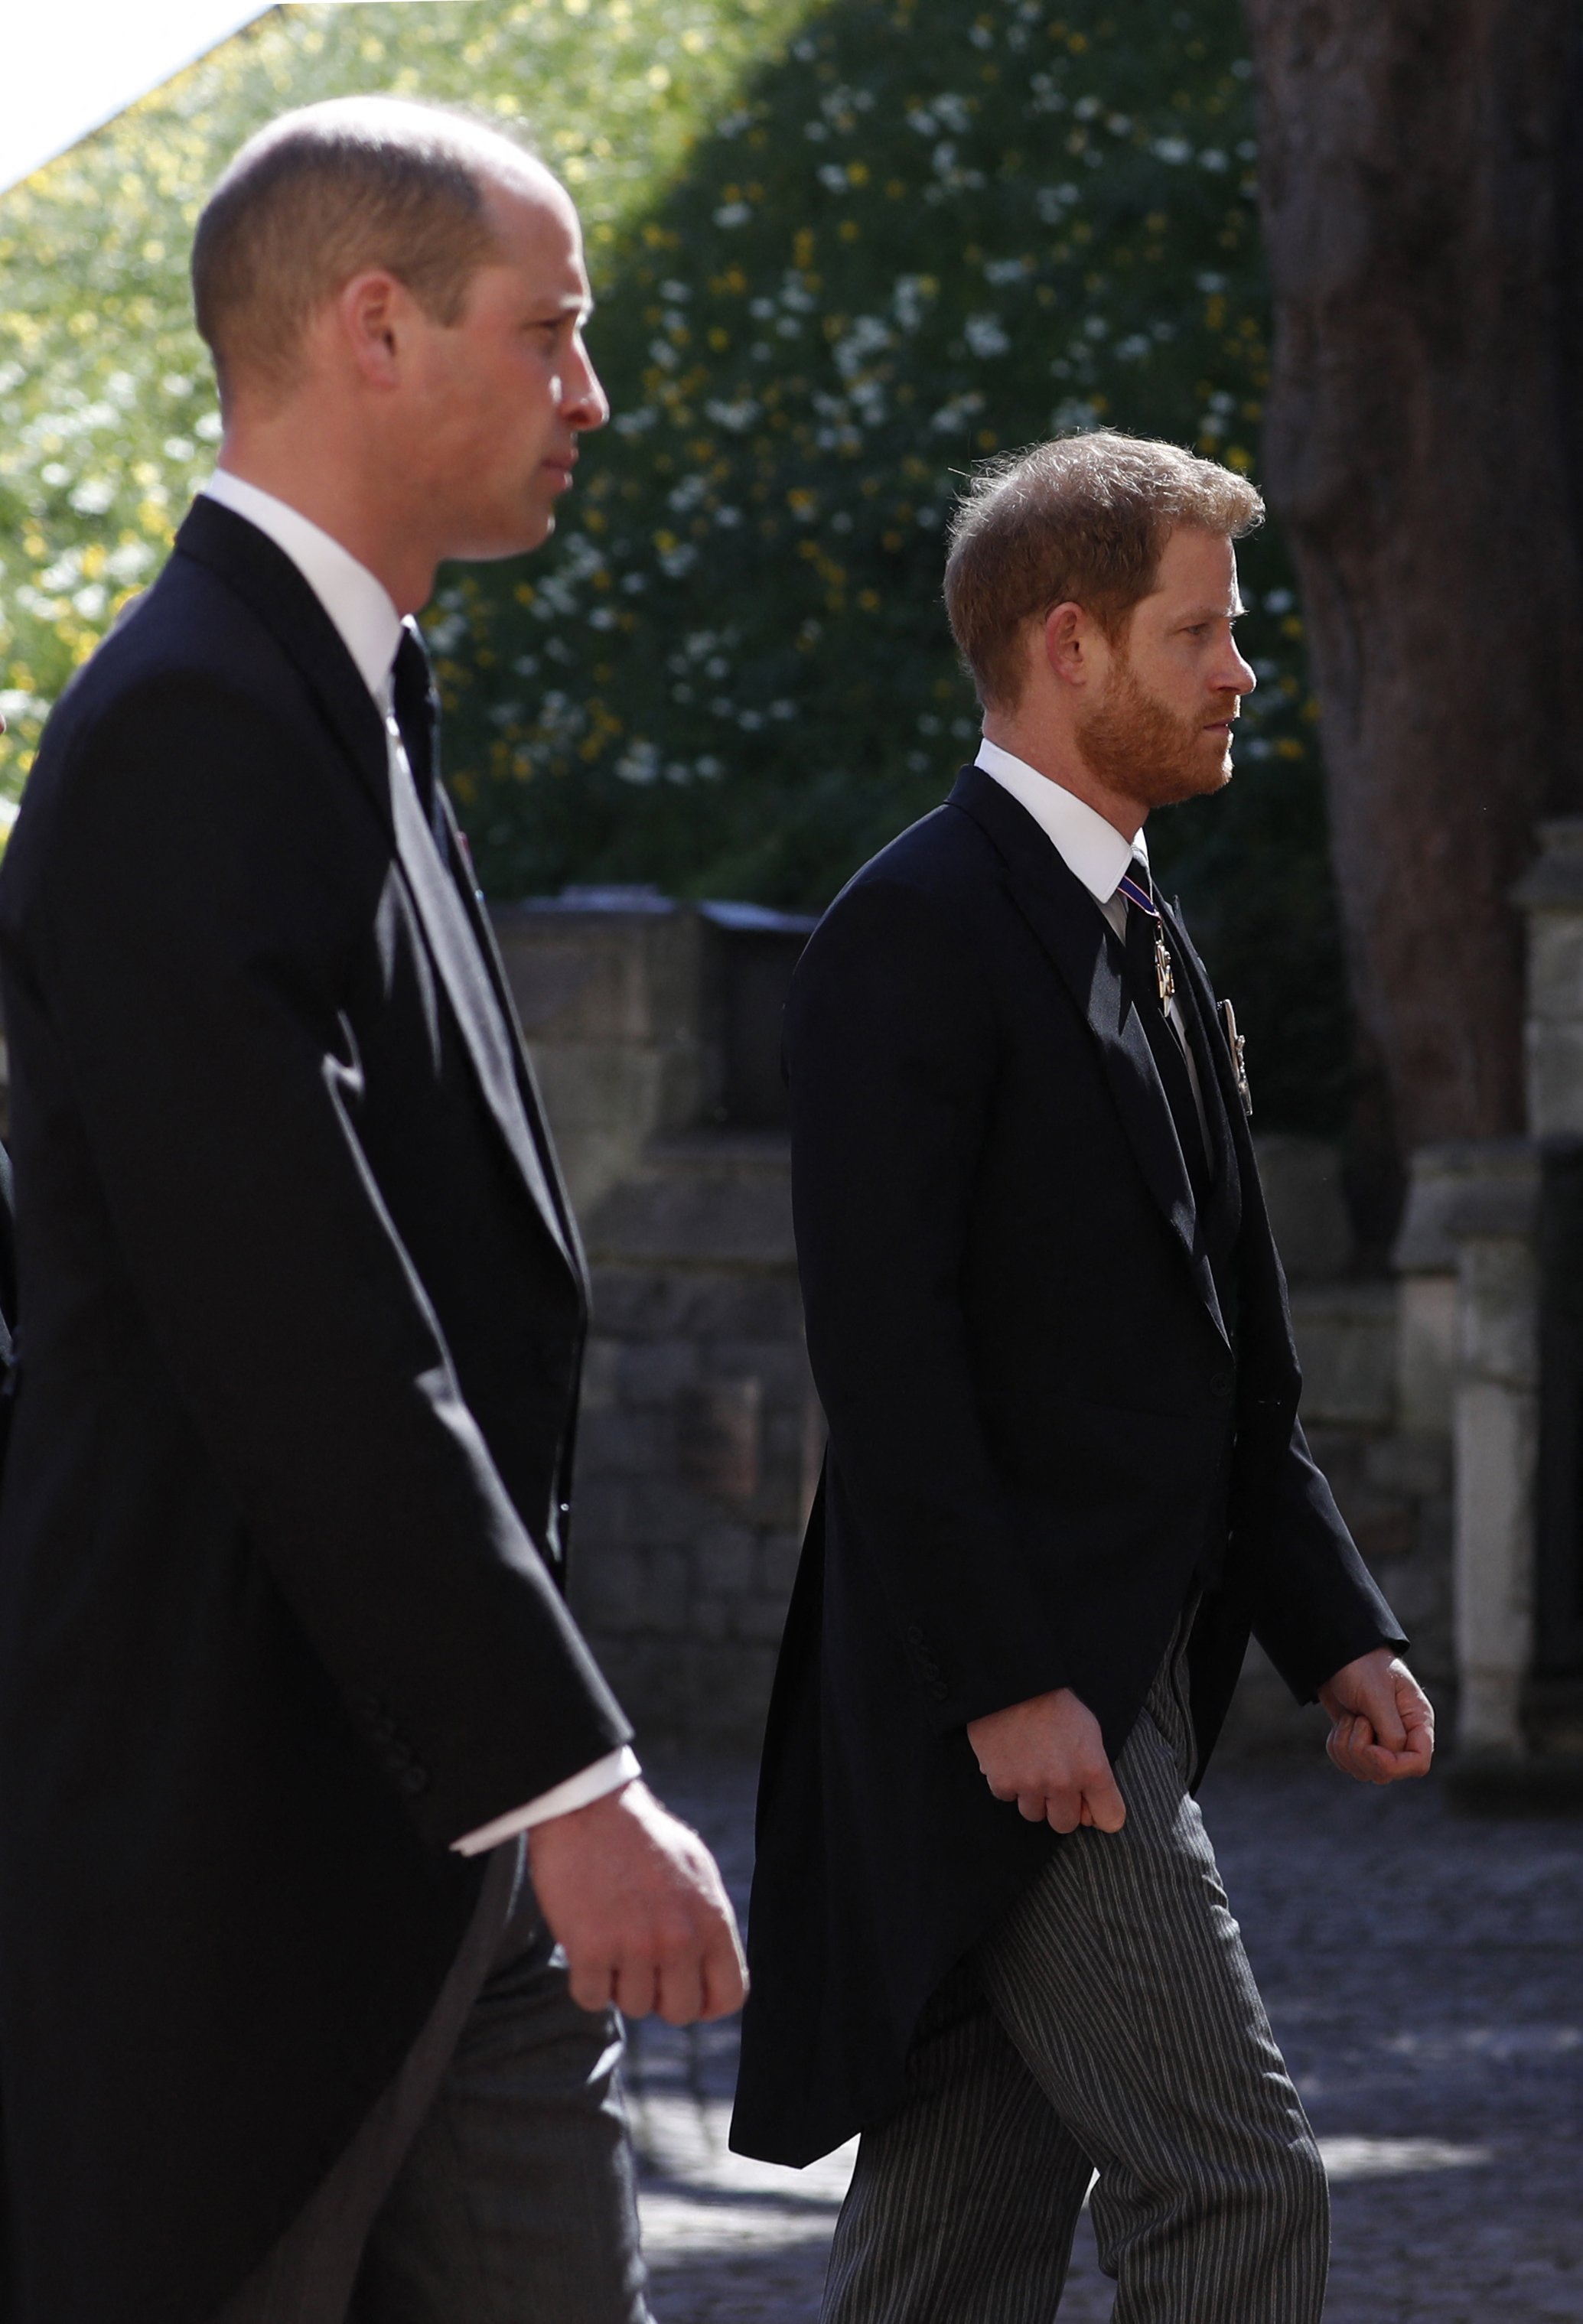 Prince William,  and Prince Harry, during the ceremonial funeral procession of Britain's Prince Philip, Duke of Edinburgh to St George's Chapel in Windsor Castle in Windsor, west of London, on April 17, 2021 | Source: Getty Images